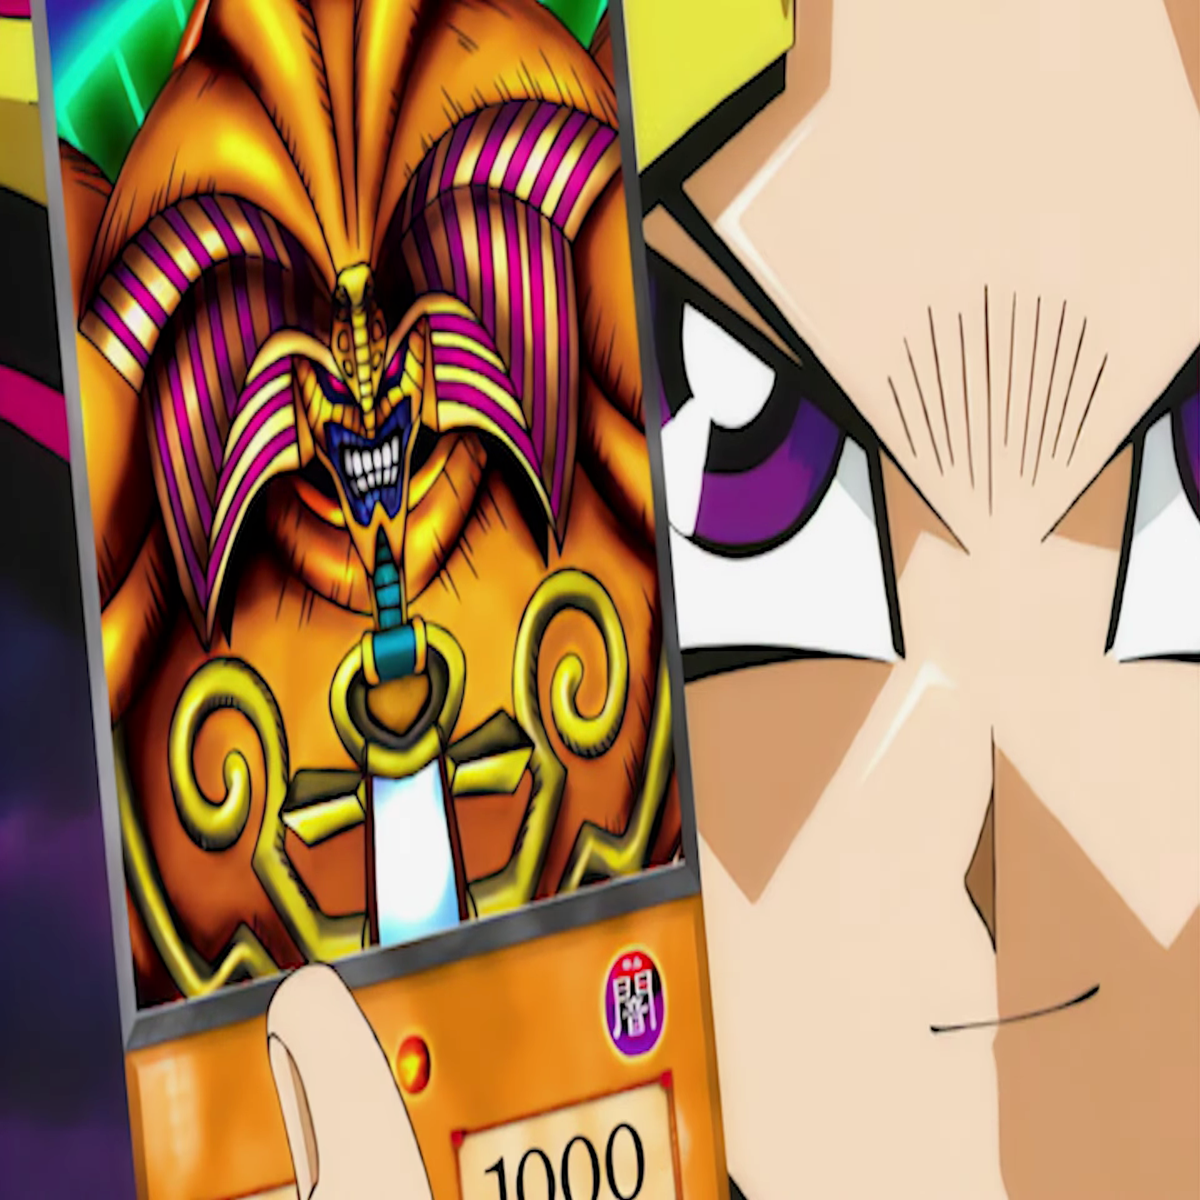 These Were the Yu-Gi-Oh! GX Anime's Most Powerful Cards